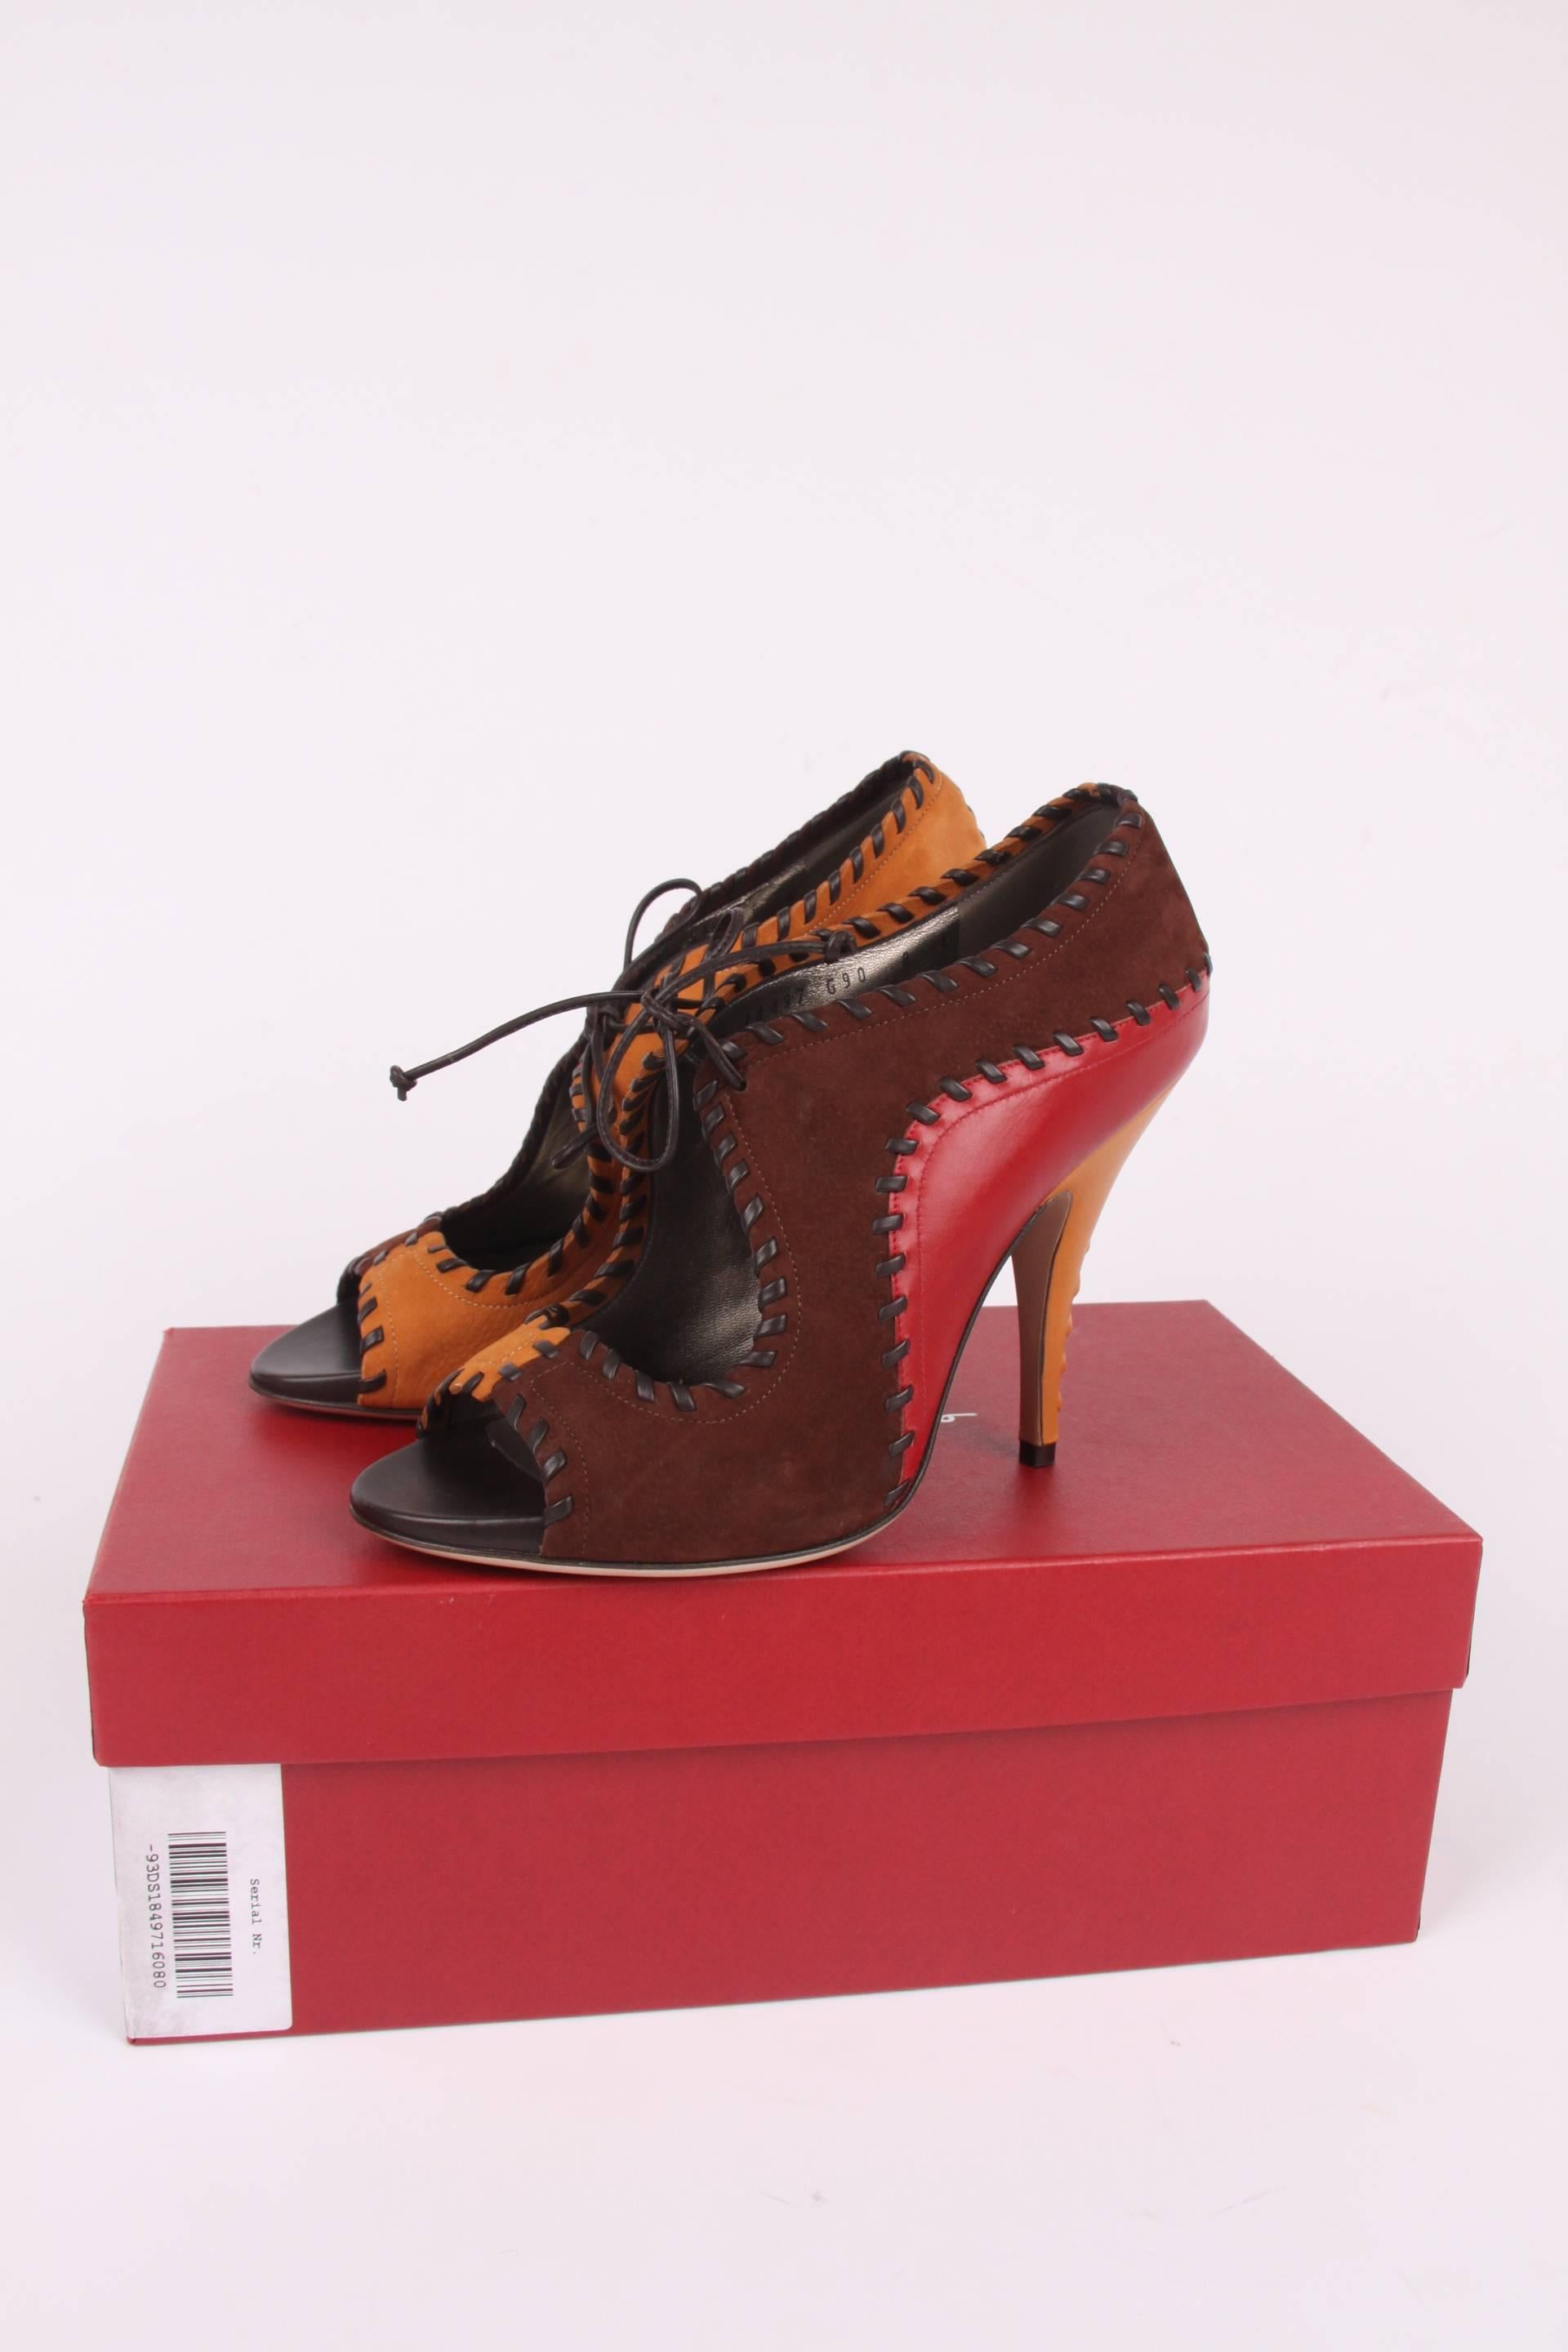 Peep-toe pumps in red, brown and camel coloured suede by Salvatore Ferragamo. Super sturdy!

A two-tone heel that measures 11,5 centimeters and a hidden platform of 1,5 centimeters. For closure a thin dark brown leather strap is added. Fully lined